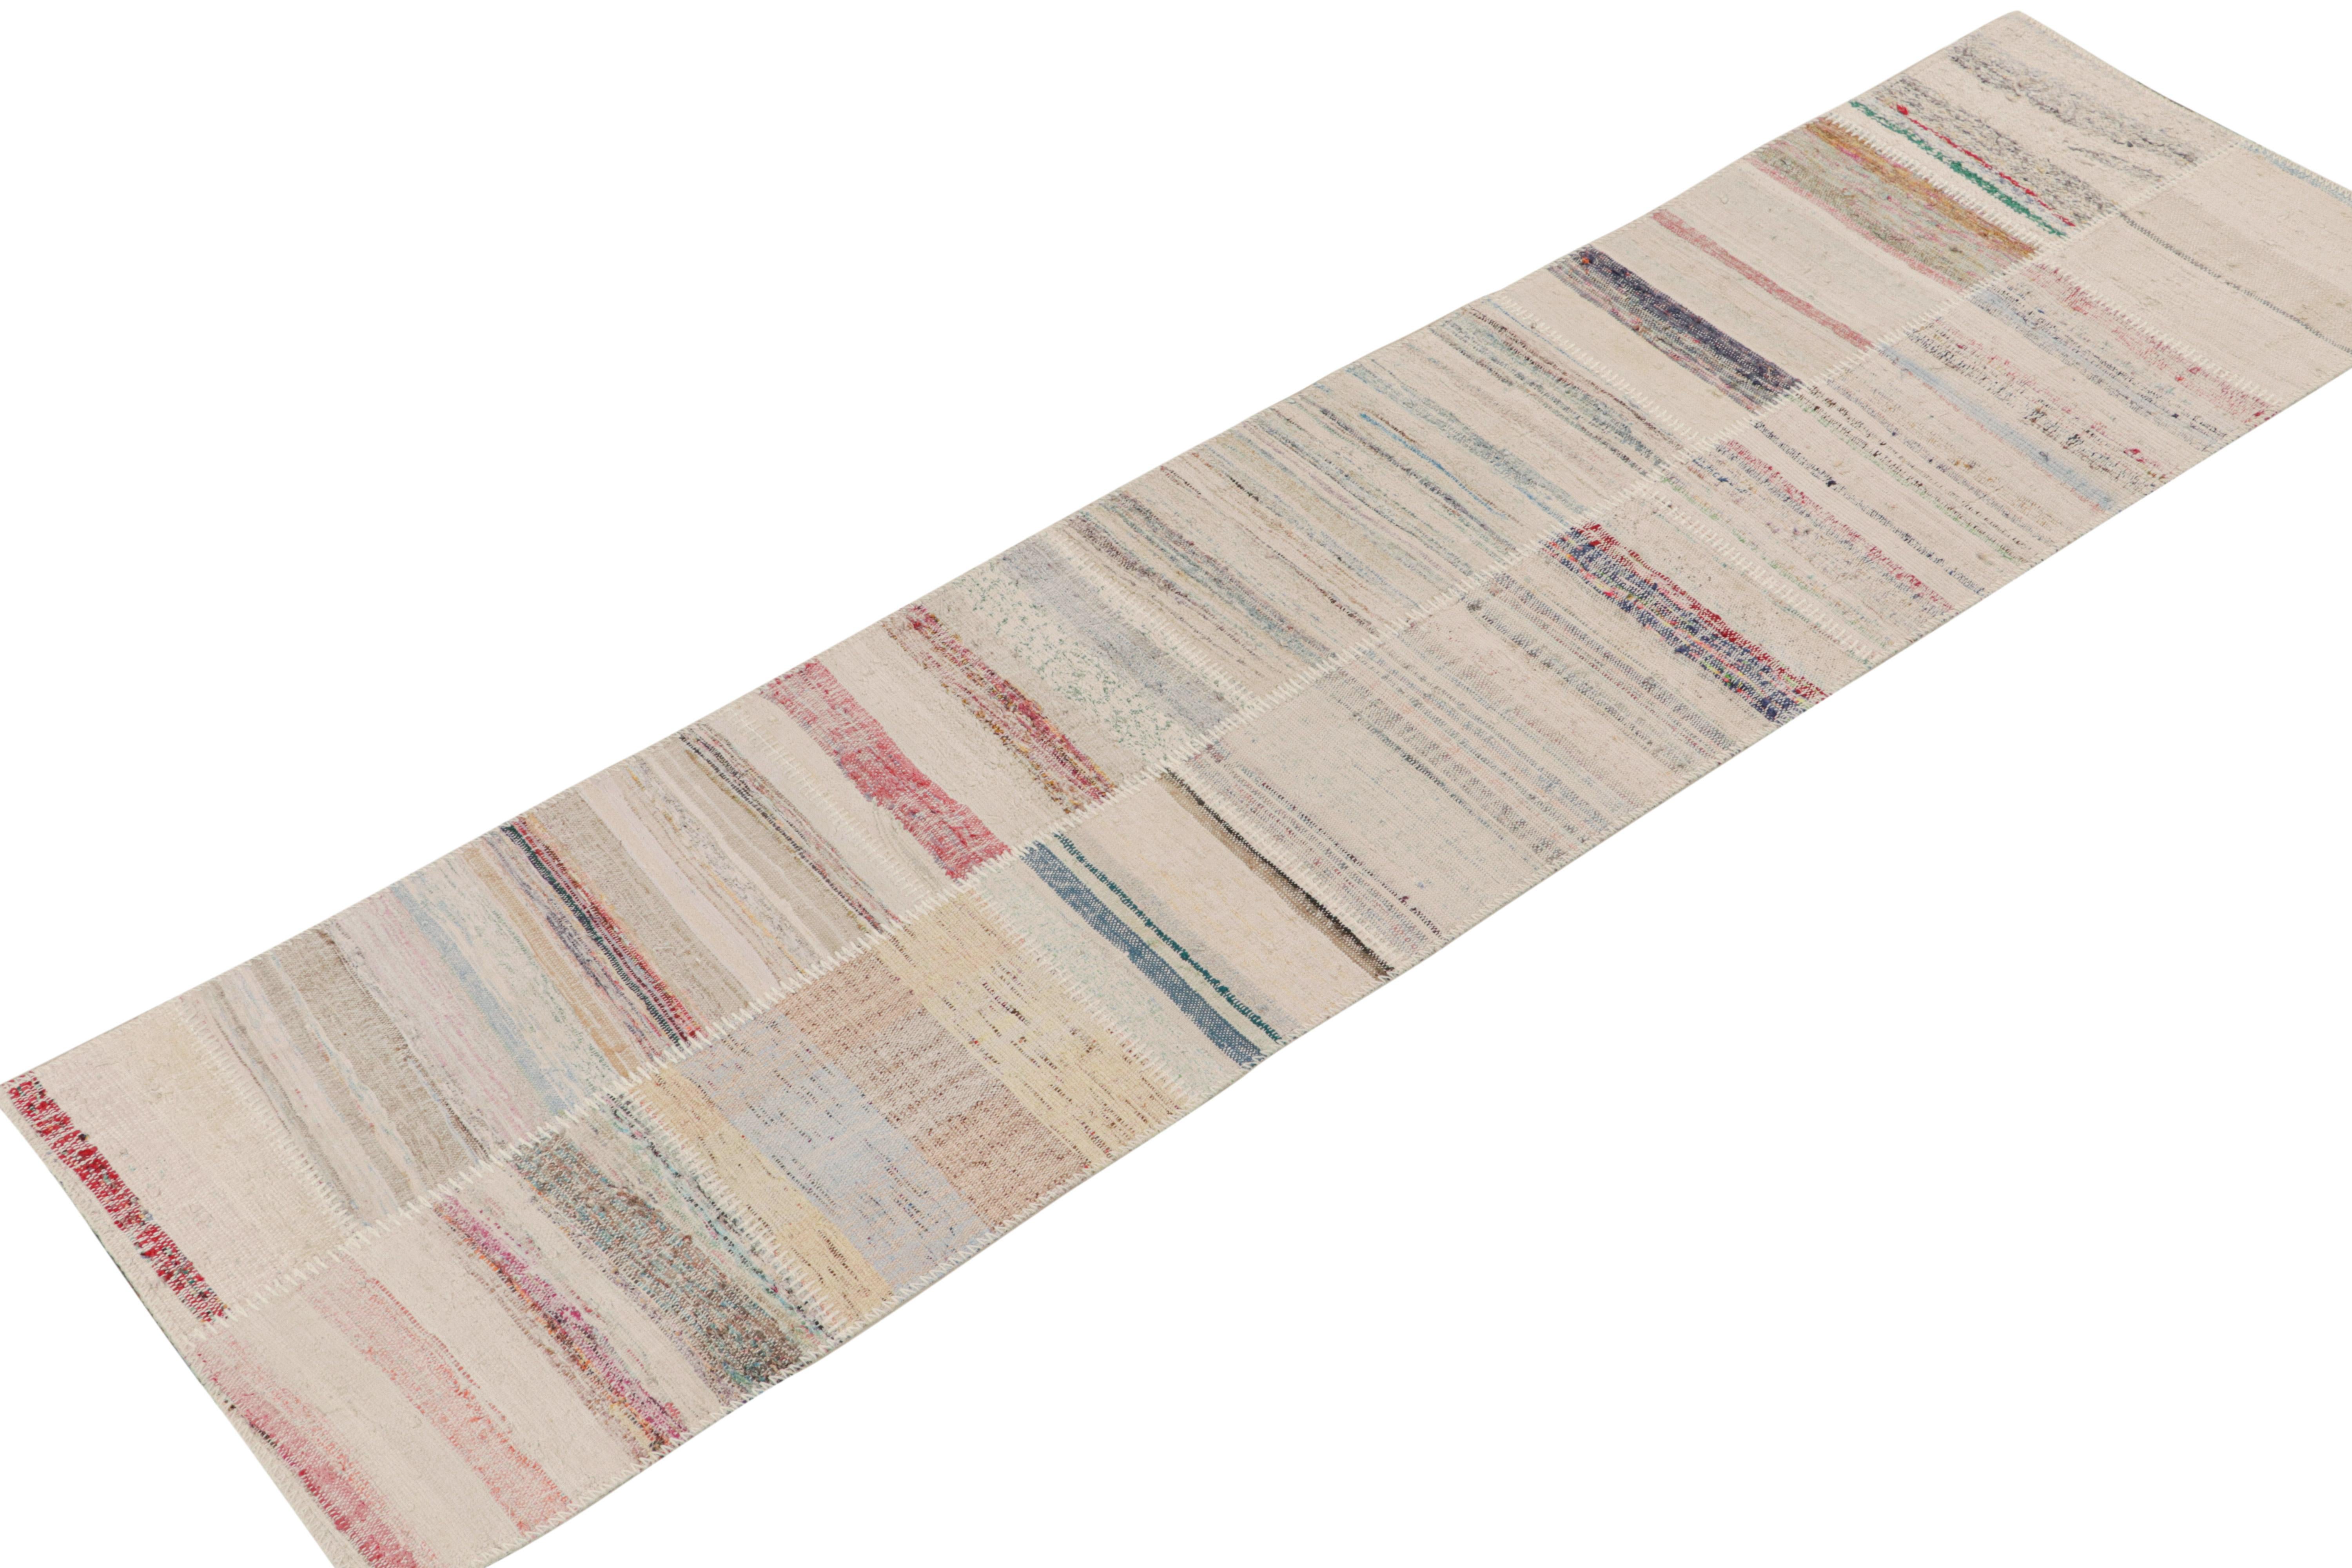 Rug & Kilim presents a contemporary 3x10 runner from their innovative new patchwork kilim collection. 

On the Design: 

This flat weave technique repurposes vintage yarns in polychromatic stripes and striae, achieving a playful look with